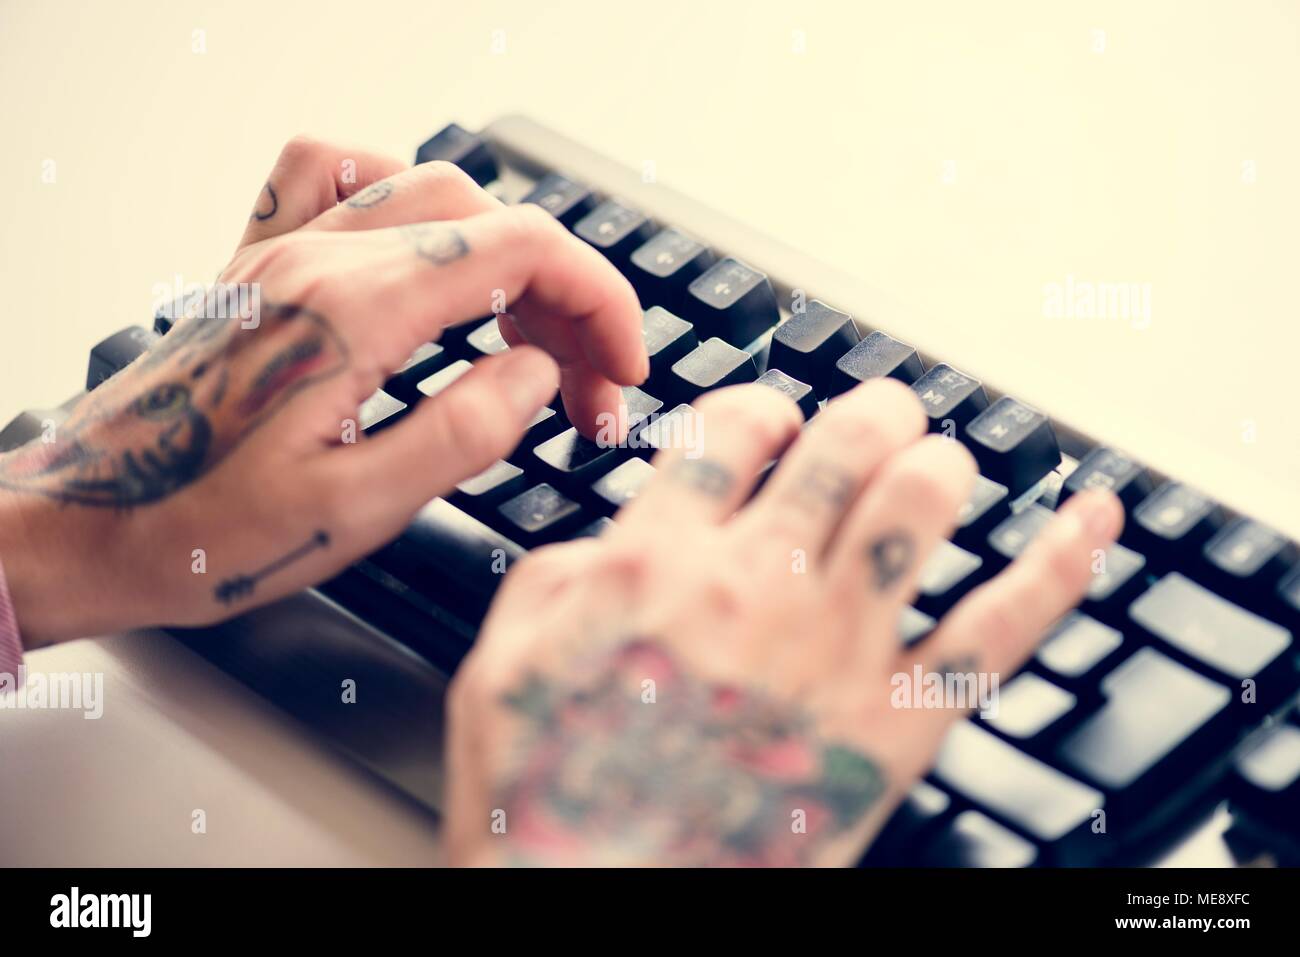 Hands with tattoo typing on a keyboard Stock Photo